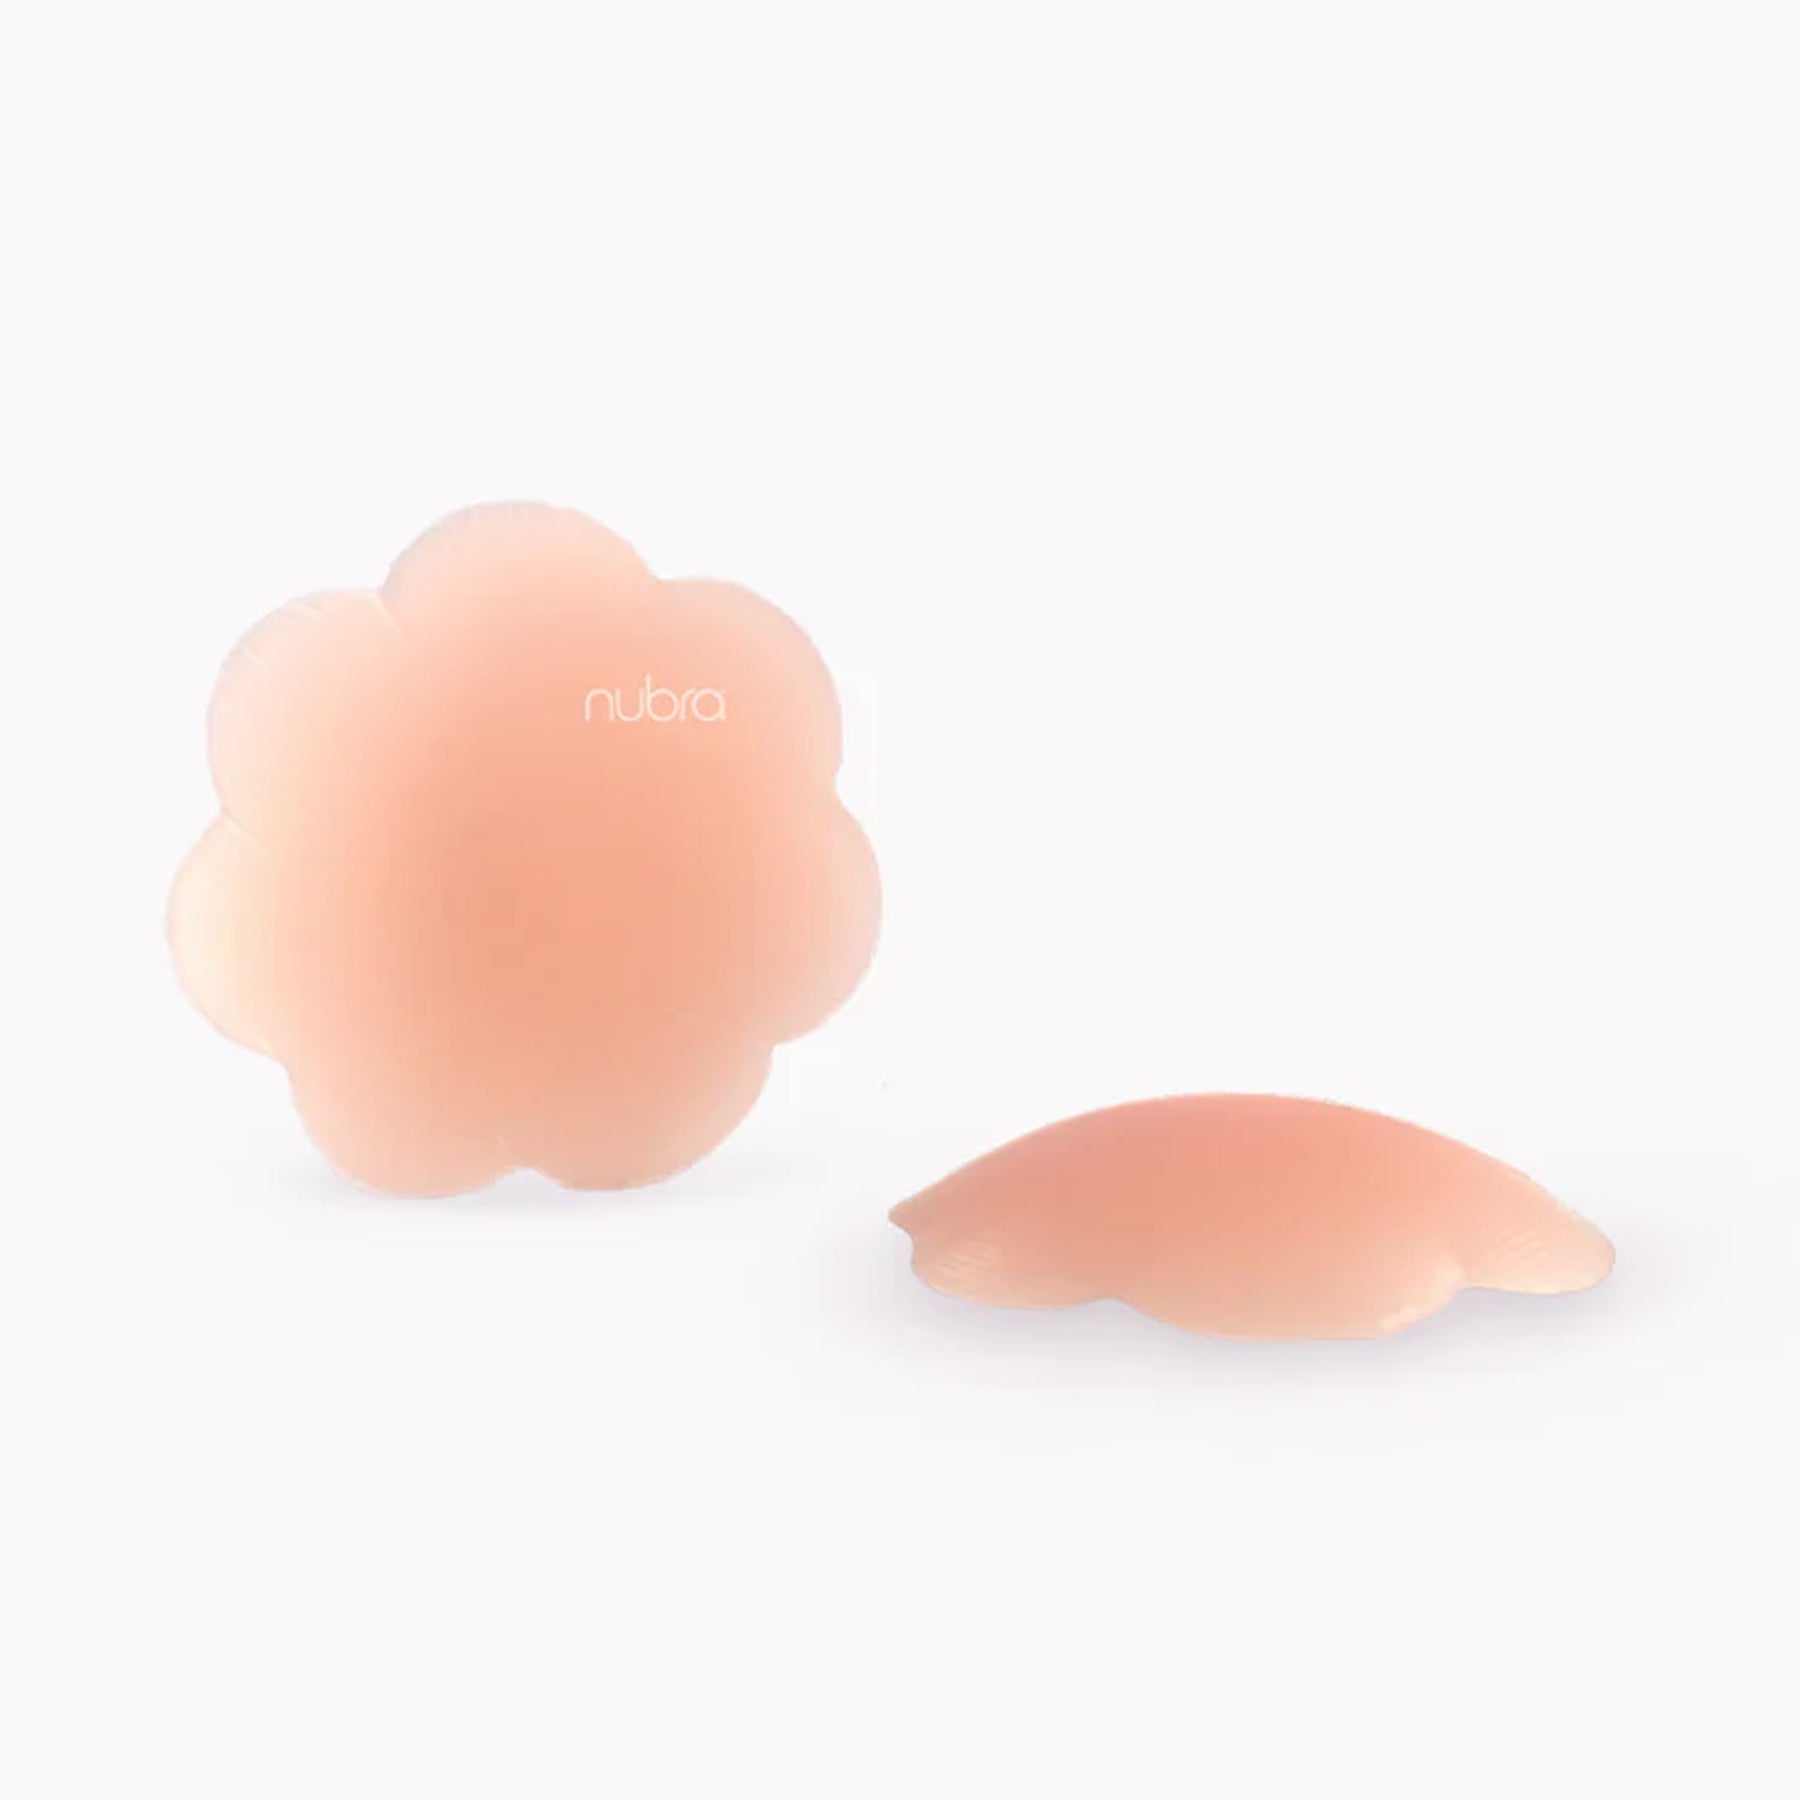 NuBra Basics ORIGINAL SILICONE NUDE buy for the best price CAD$ 85.00 -  Canada and U.S. delivery – Bralissimo